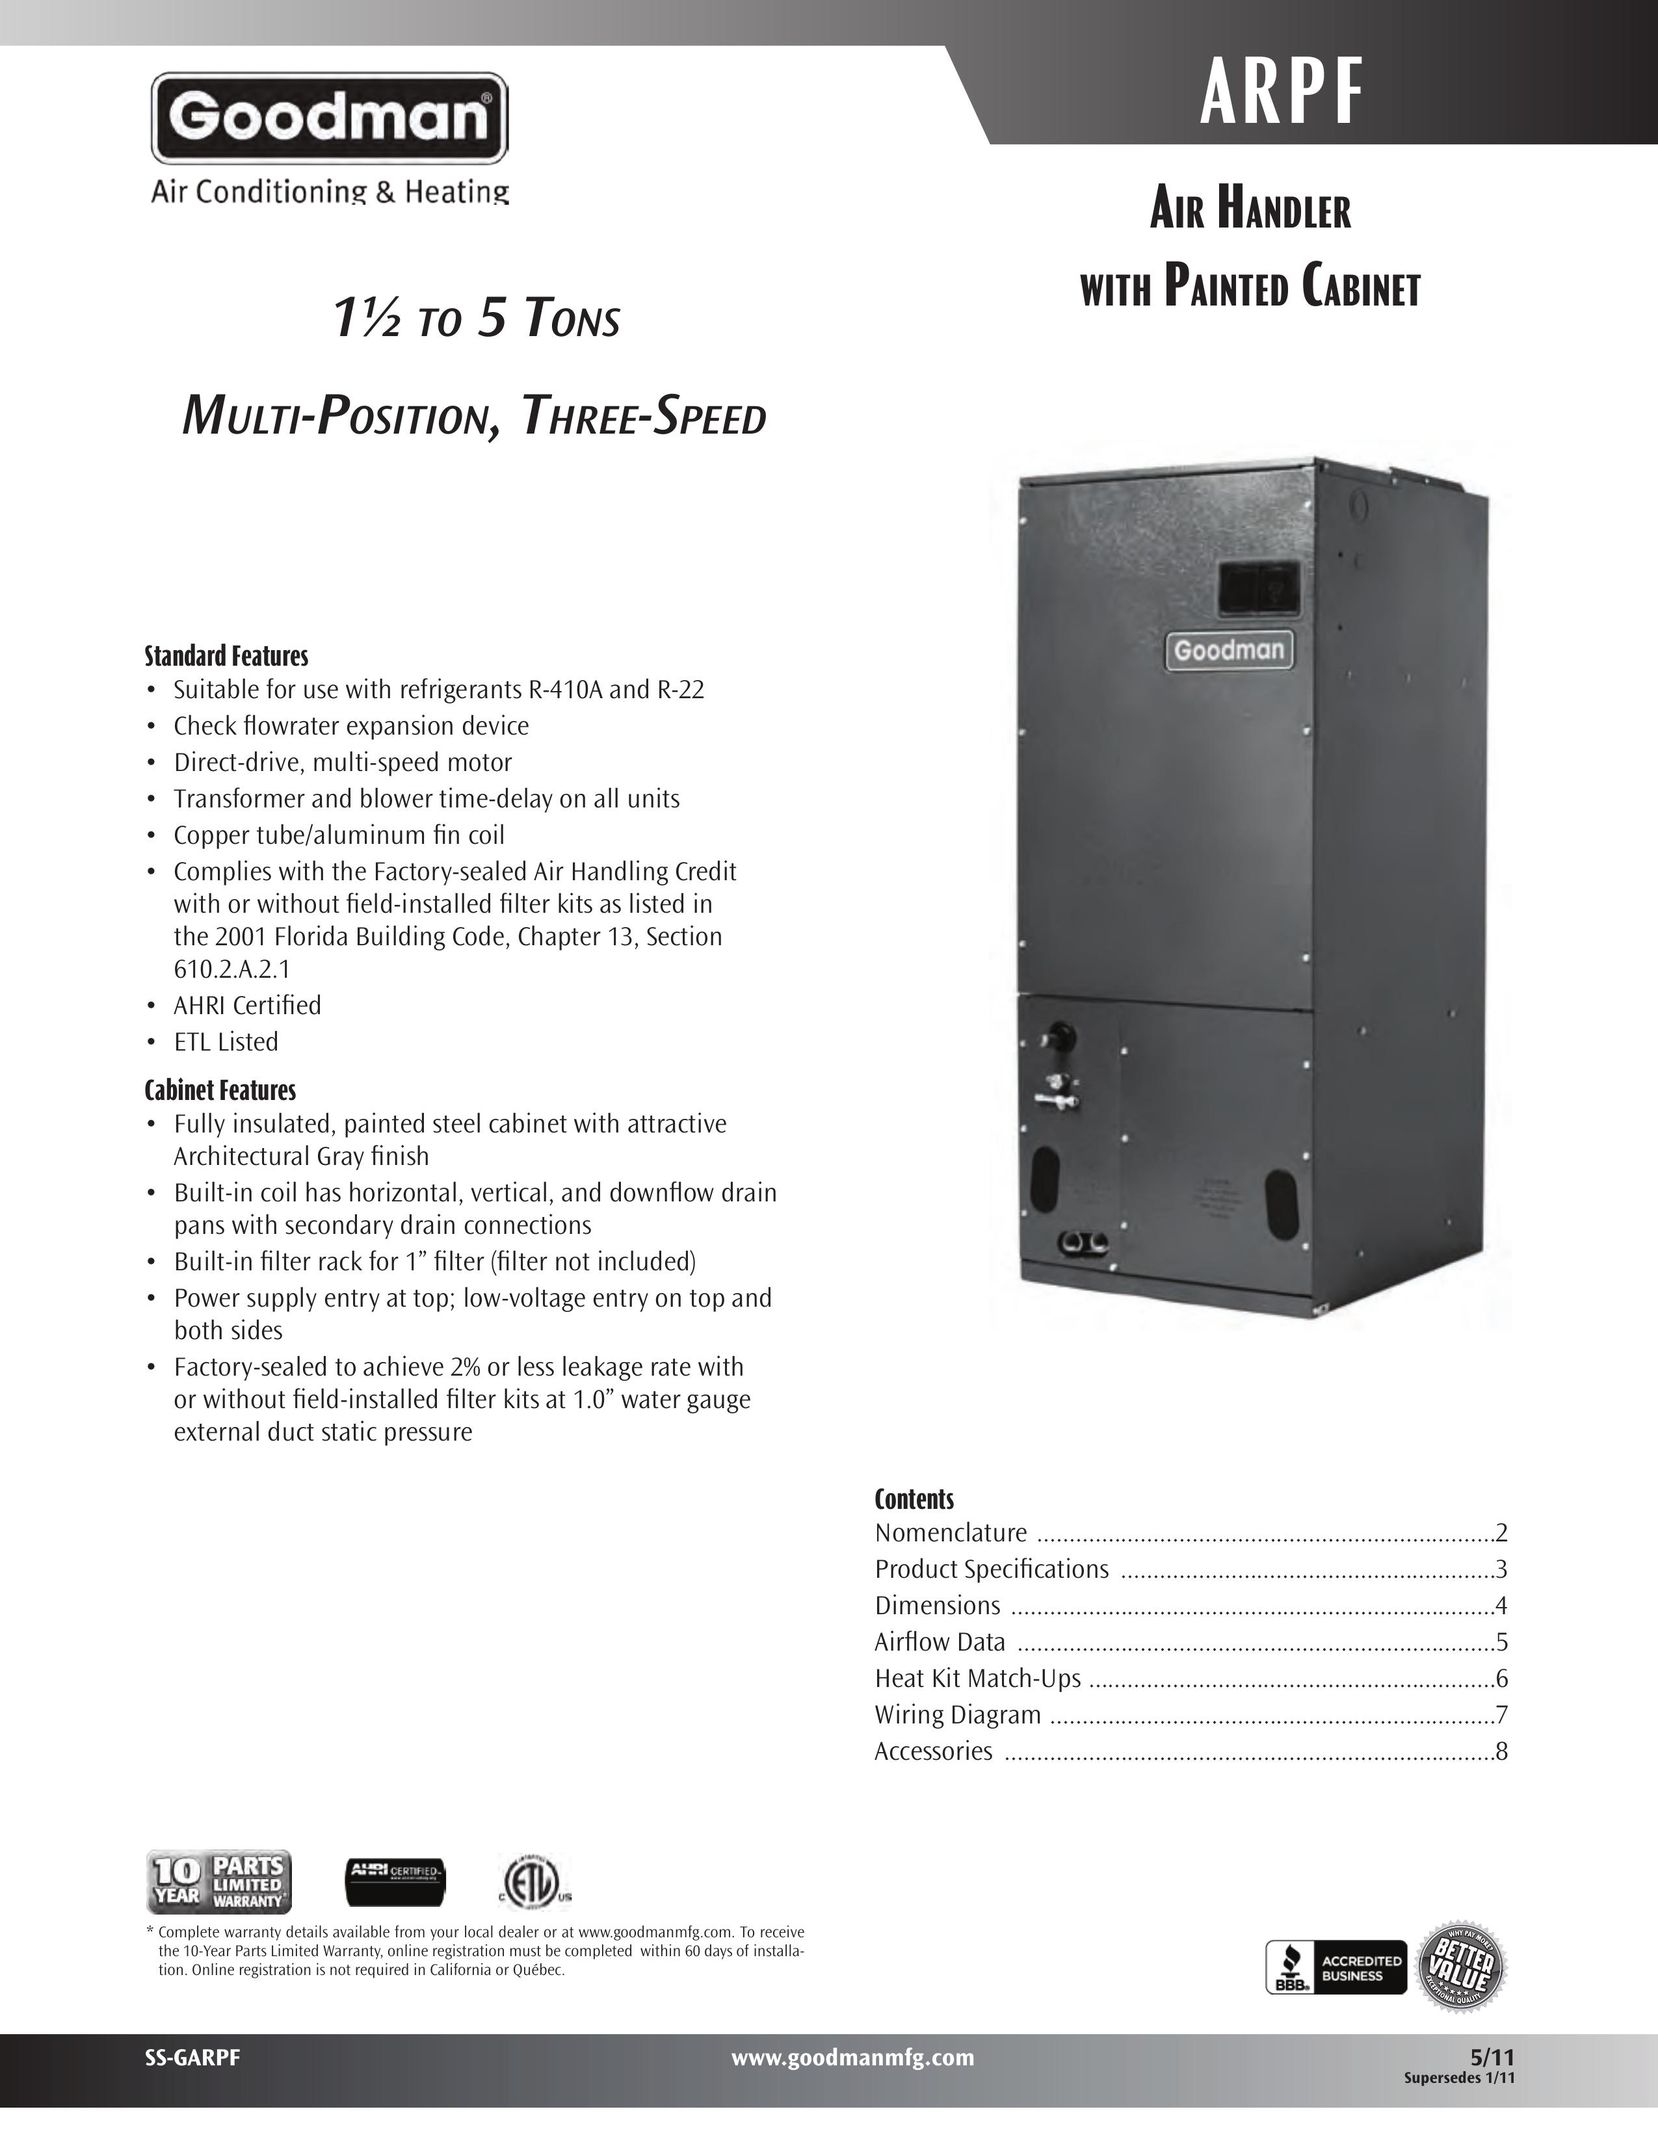 Goodman Mfg Air Handler with Painted Cabinet Air Conditioner User Manual